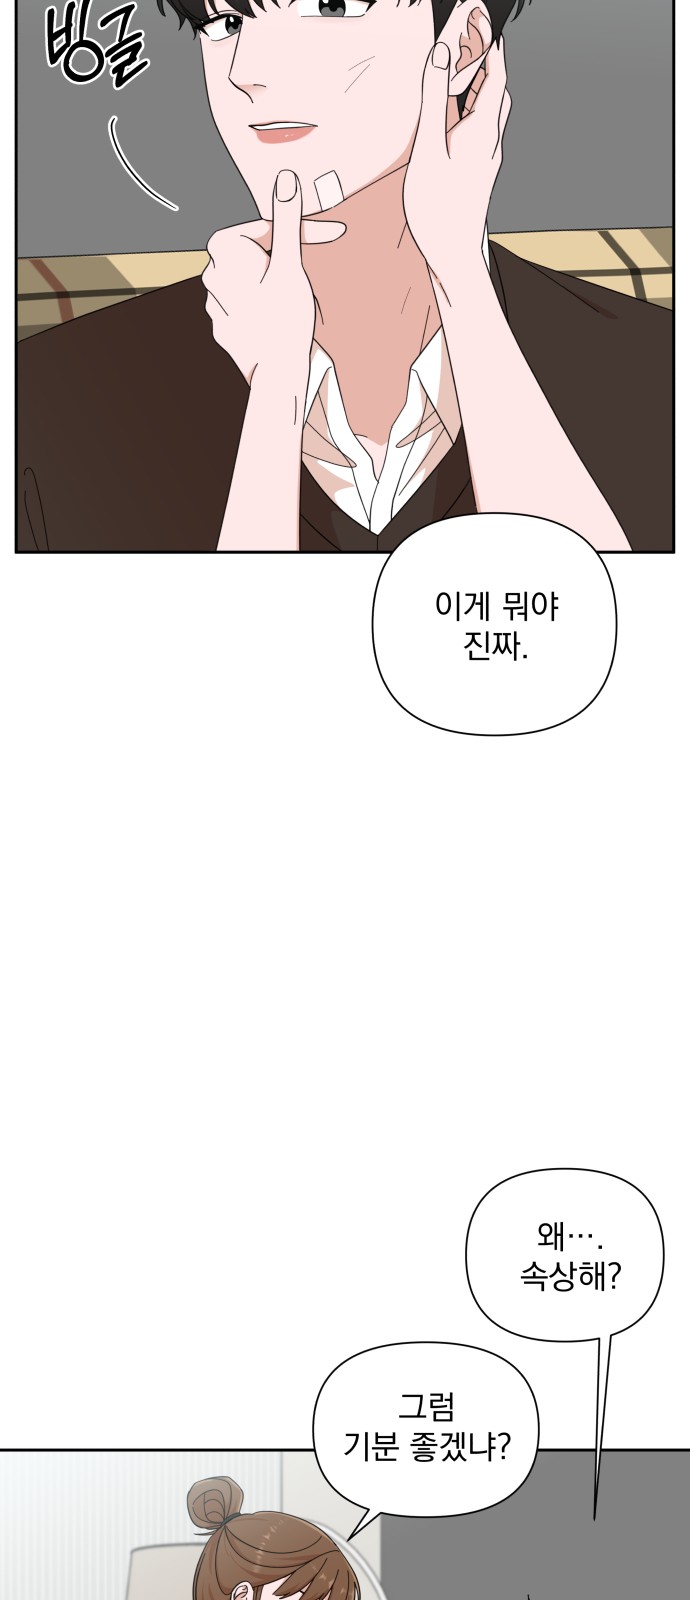 The Man With Pretty Lips - Chapter 16 - Page 57